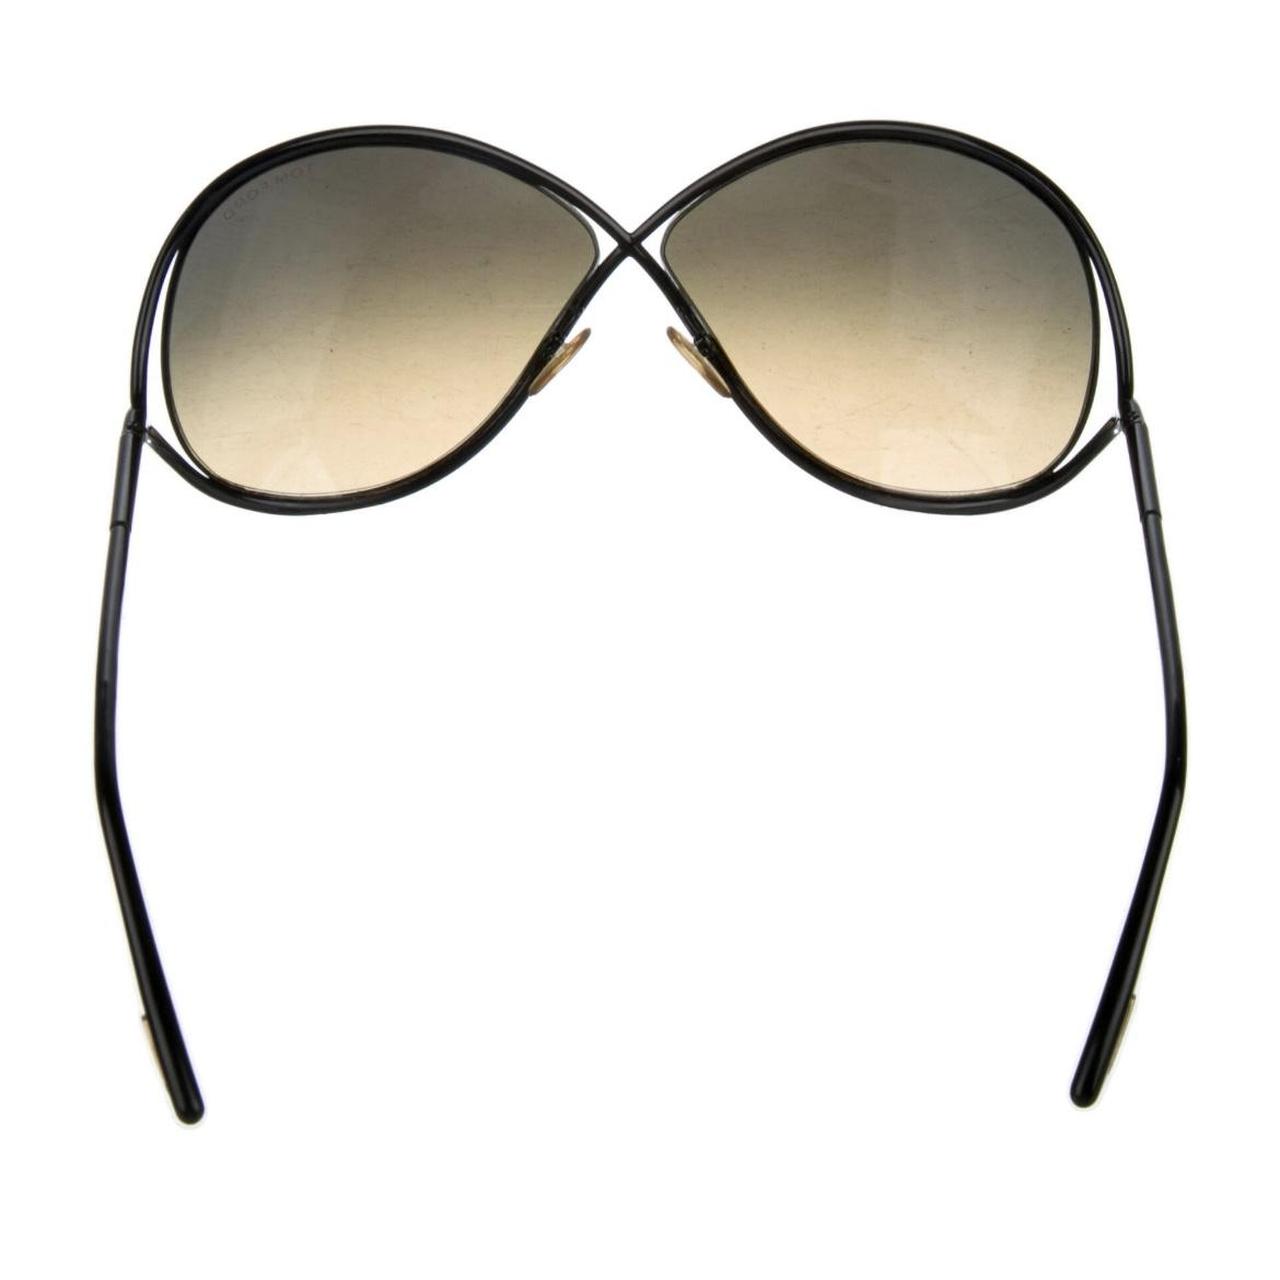 TOM FORD Women's Black and Brown Sunglasses (3)